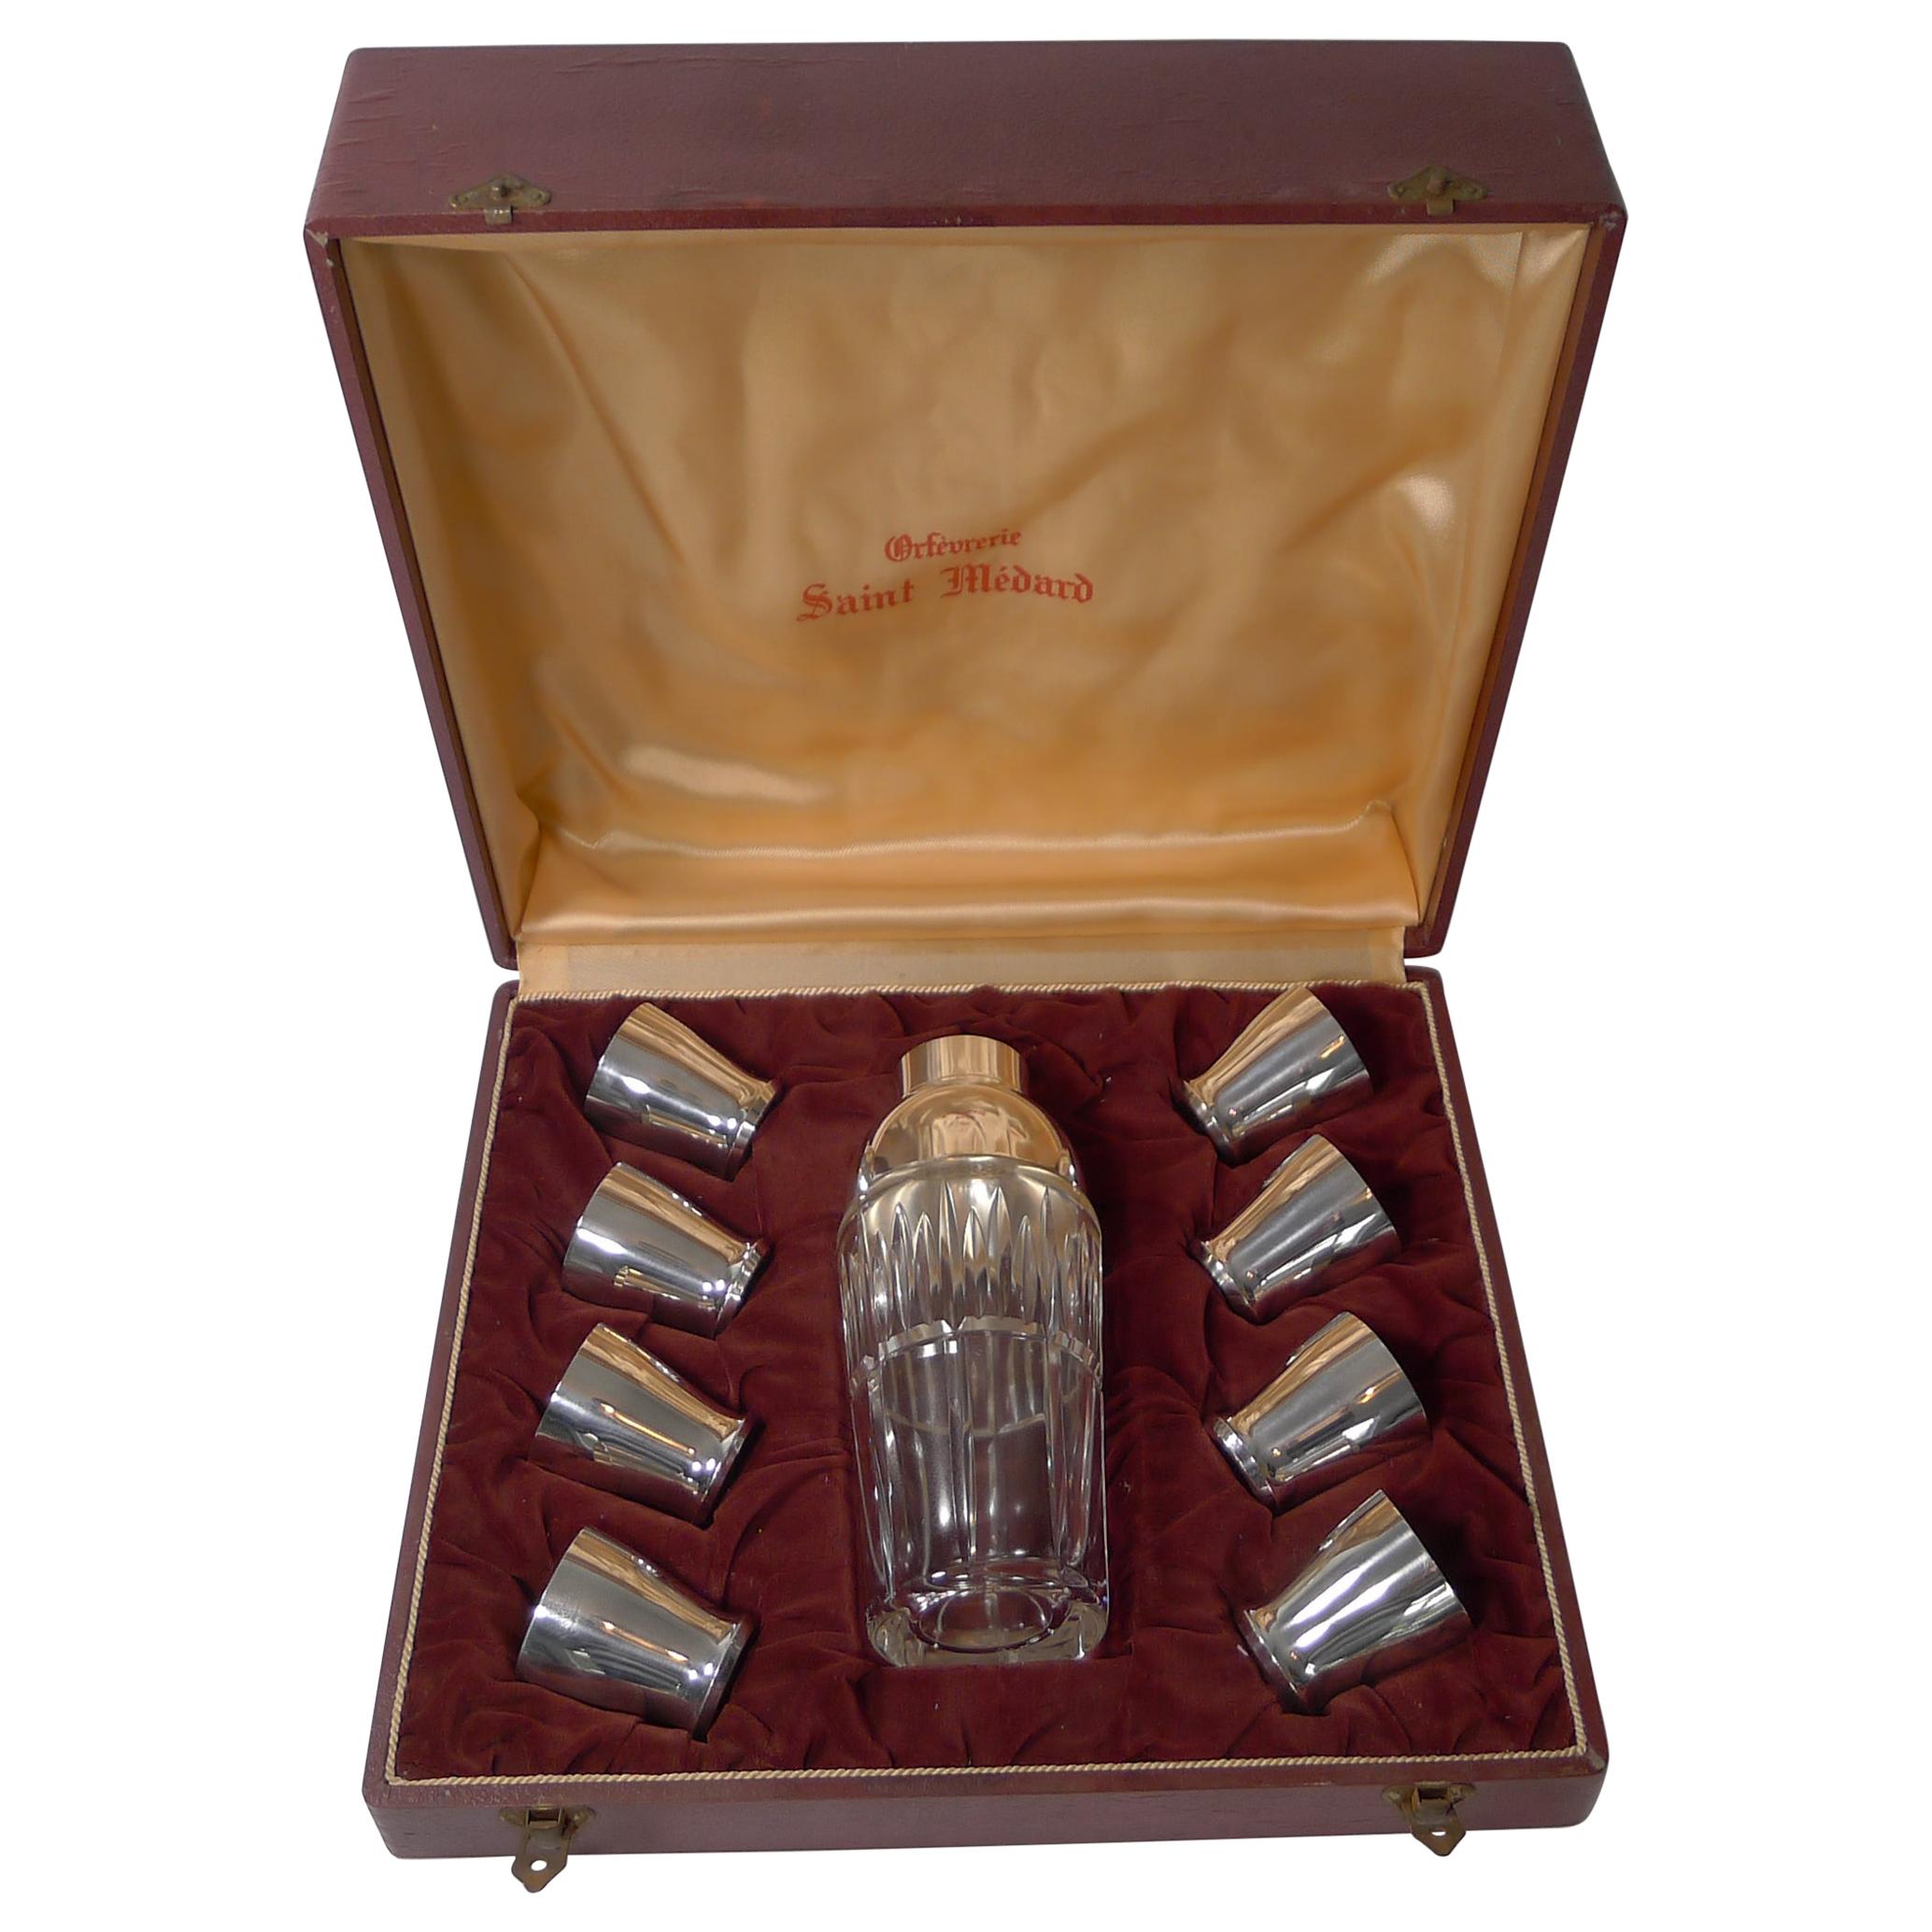 French Art Deco Crystal and Silver Plated Cocktail Shaker / Set by St. Medard